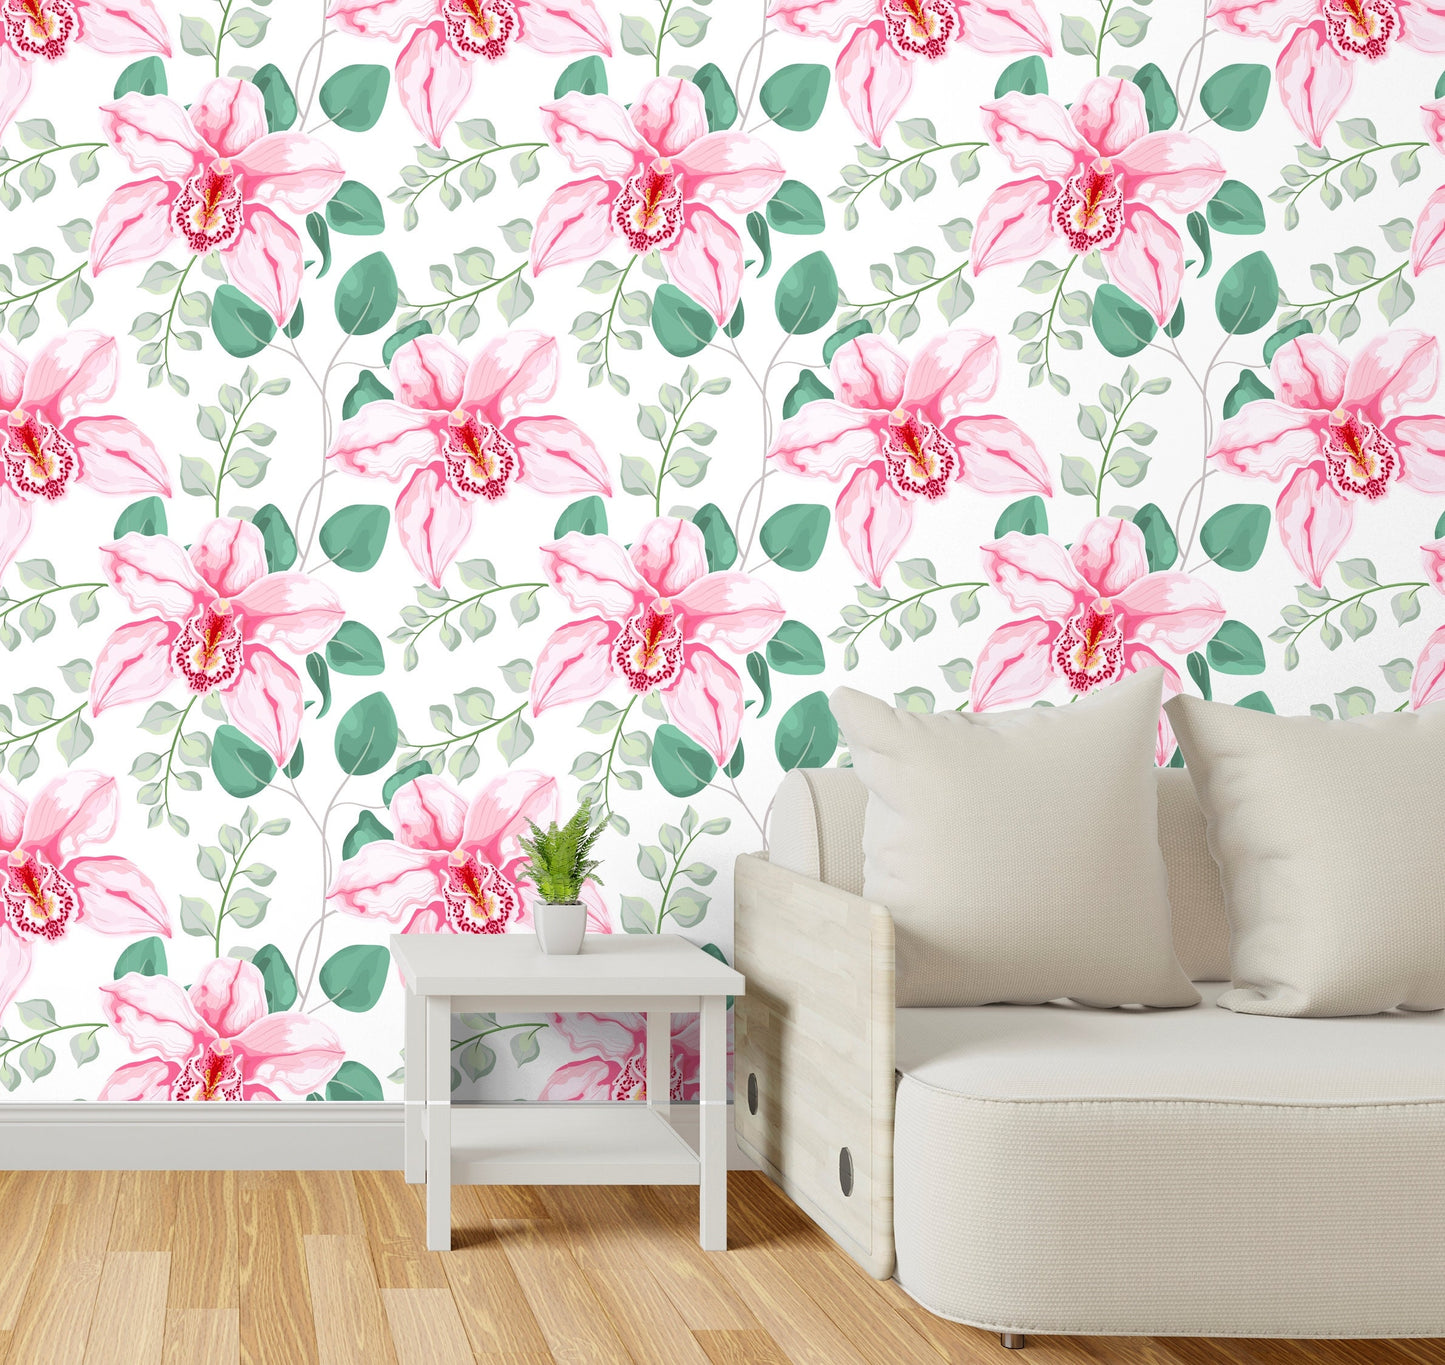 Orchid Wallpaper Peel and Stick, Pink Floral Wallpaper, Removable Wall Paper